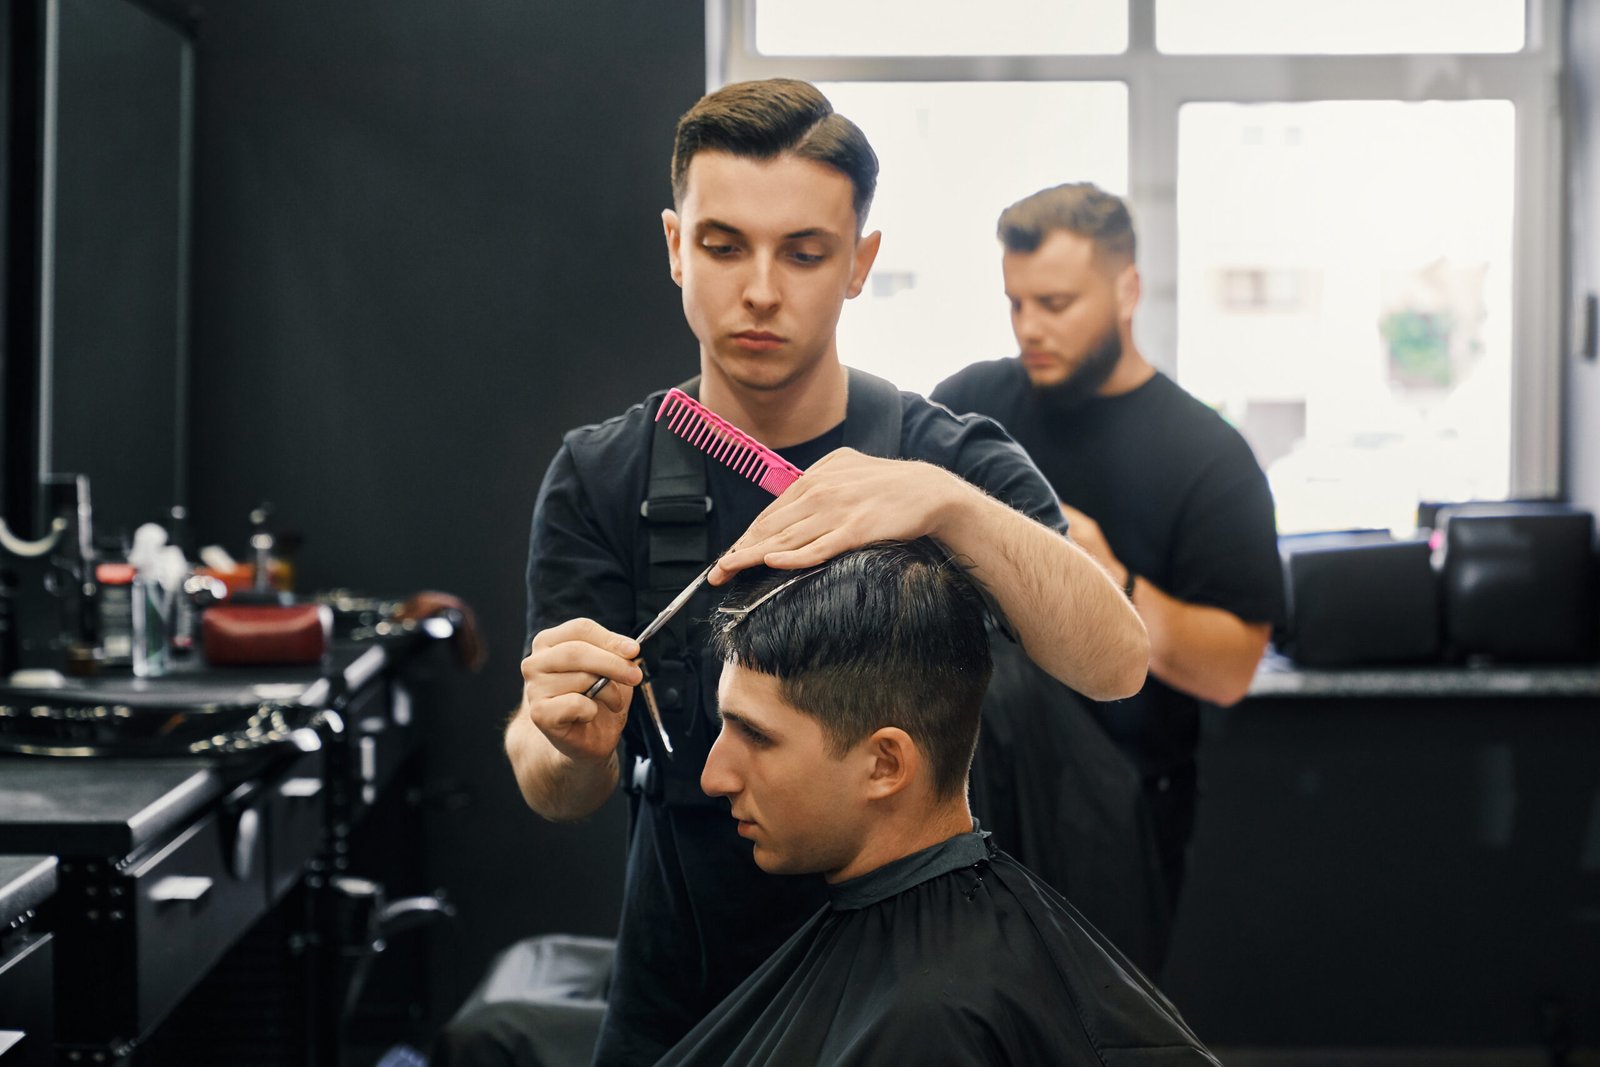 Side view of caucasian male client getting trendy haircut at modern barbershop. Professional barber using scissors and comb while styling hair of young man.